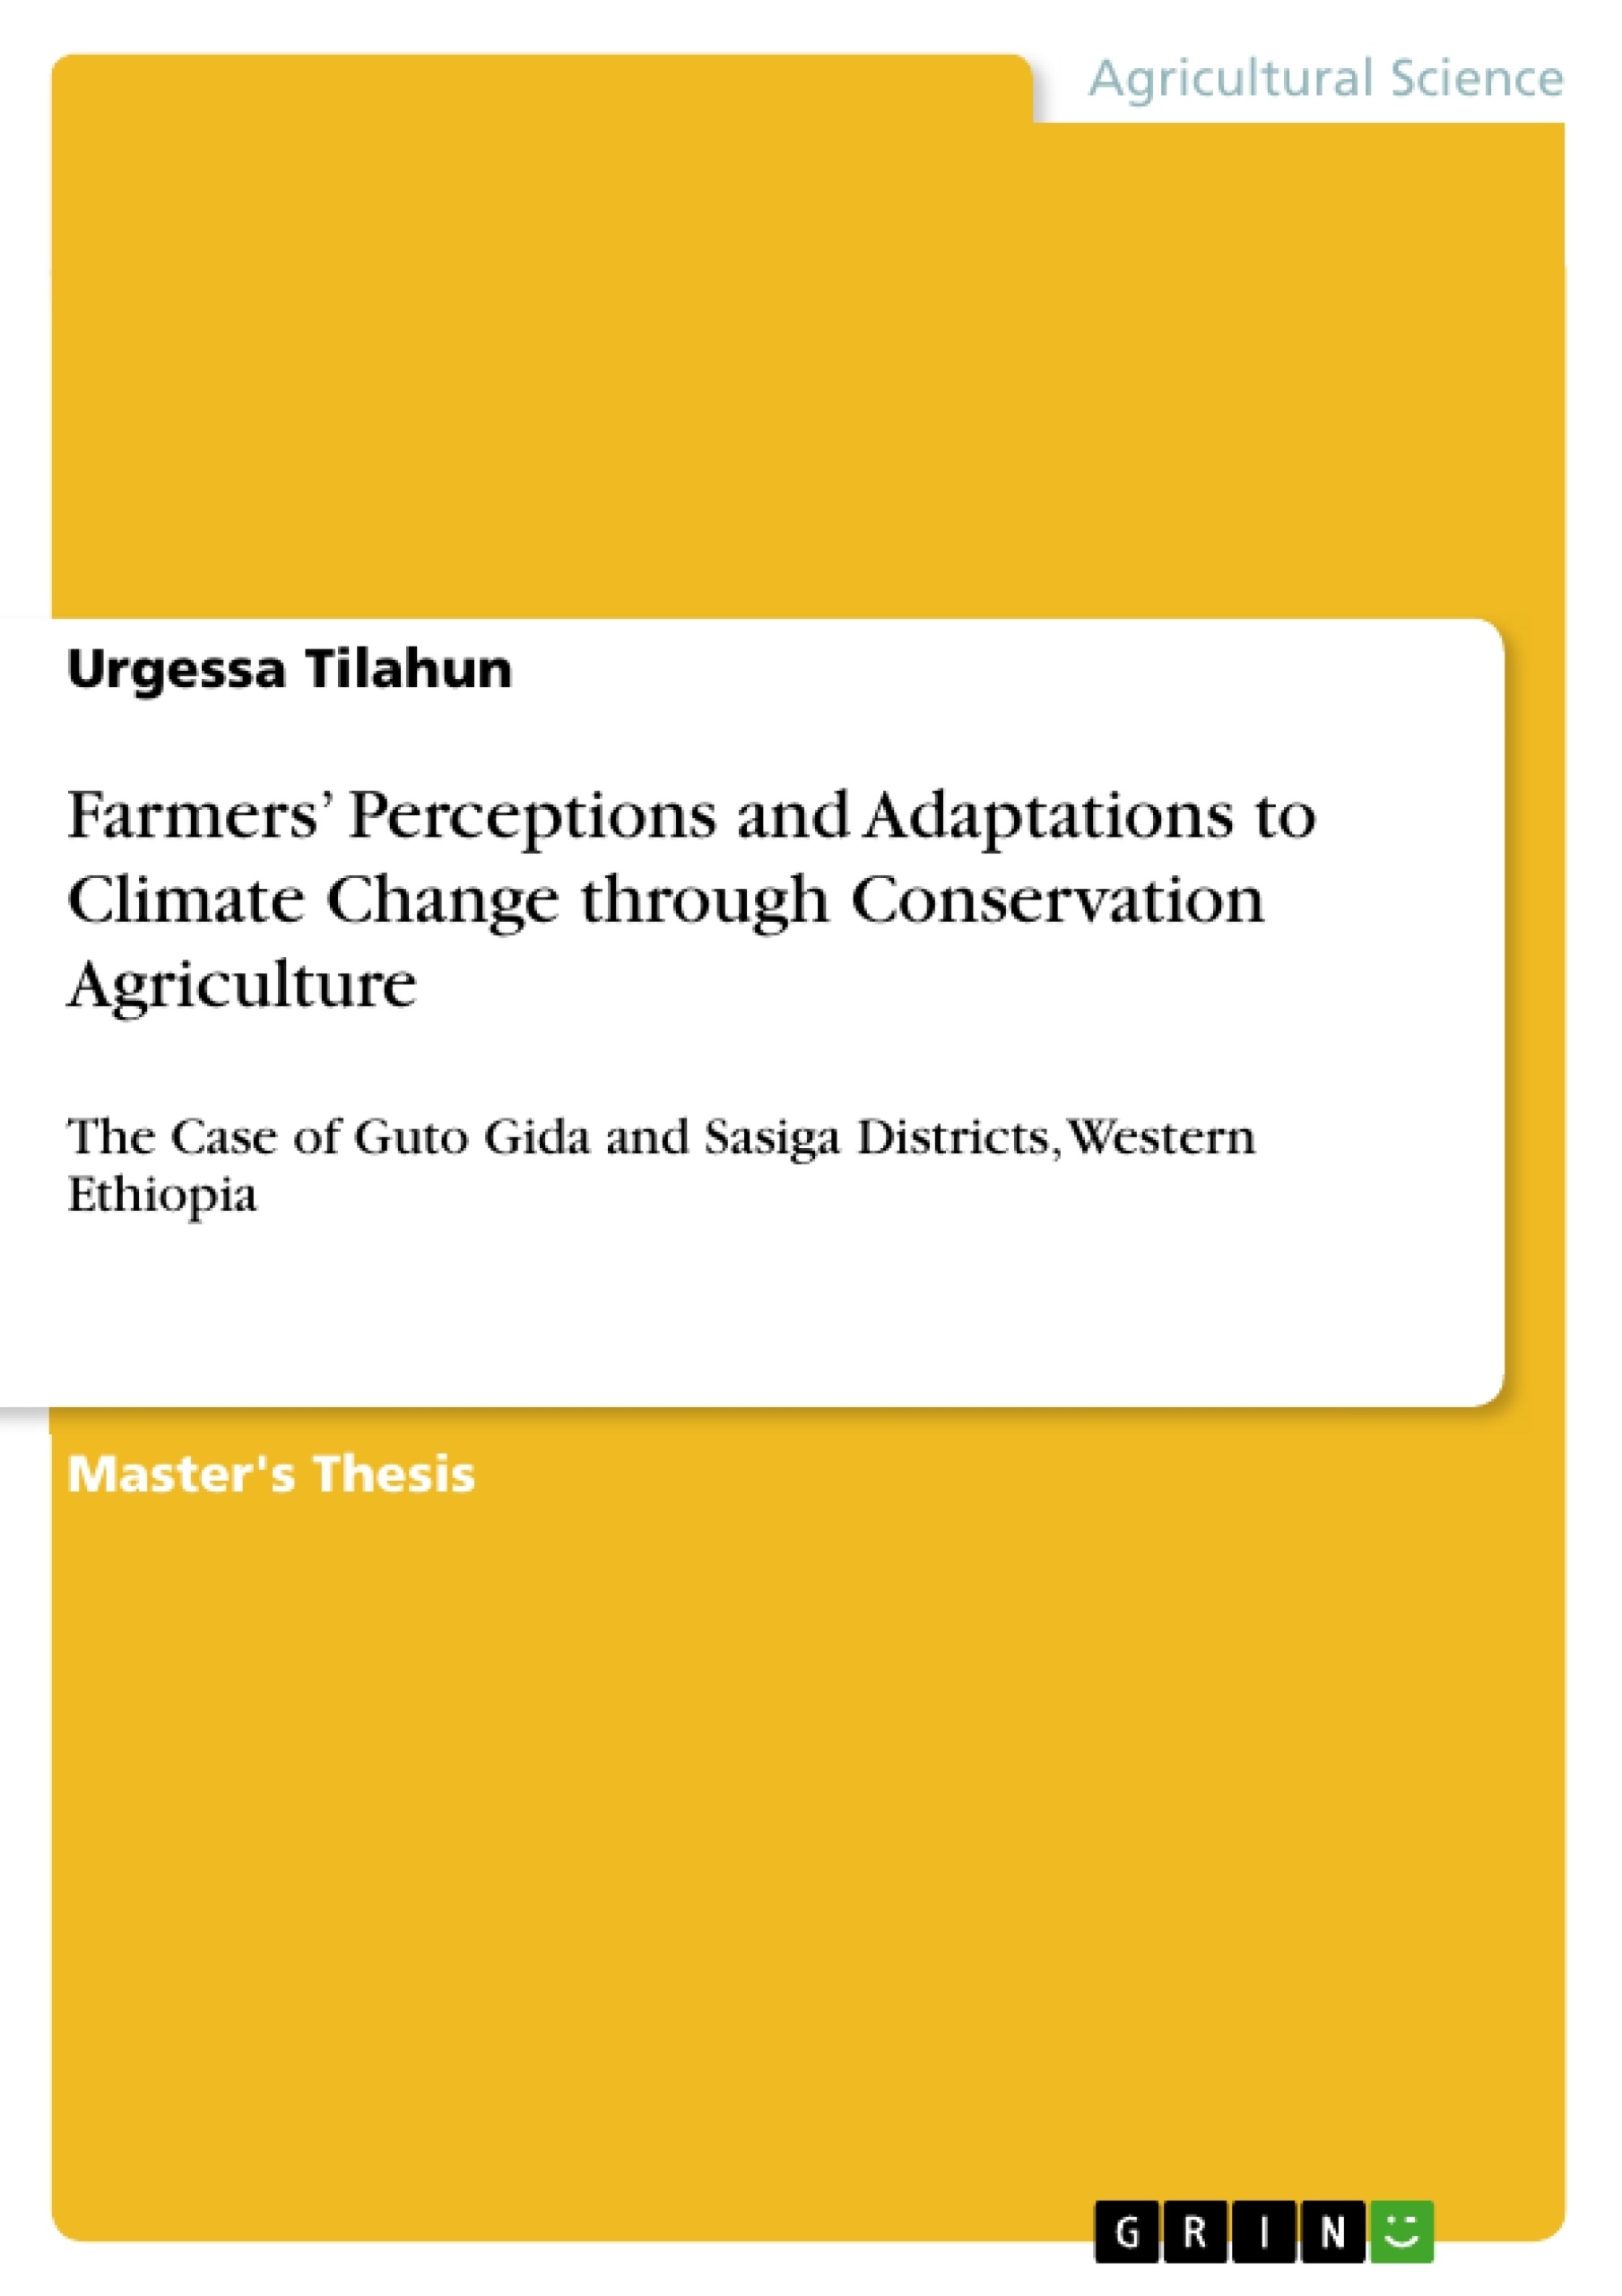 Titre: Farmers’ Perceptions and Adaptations to Climate Change through Conservation Agriculture